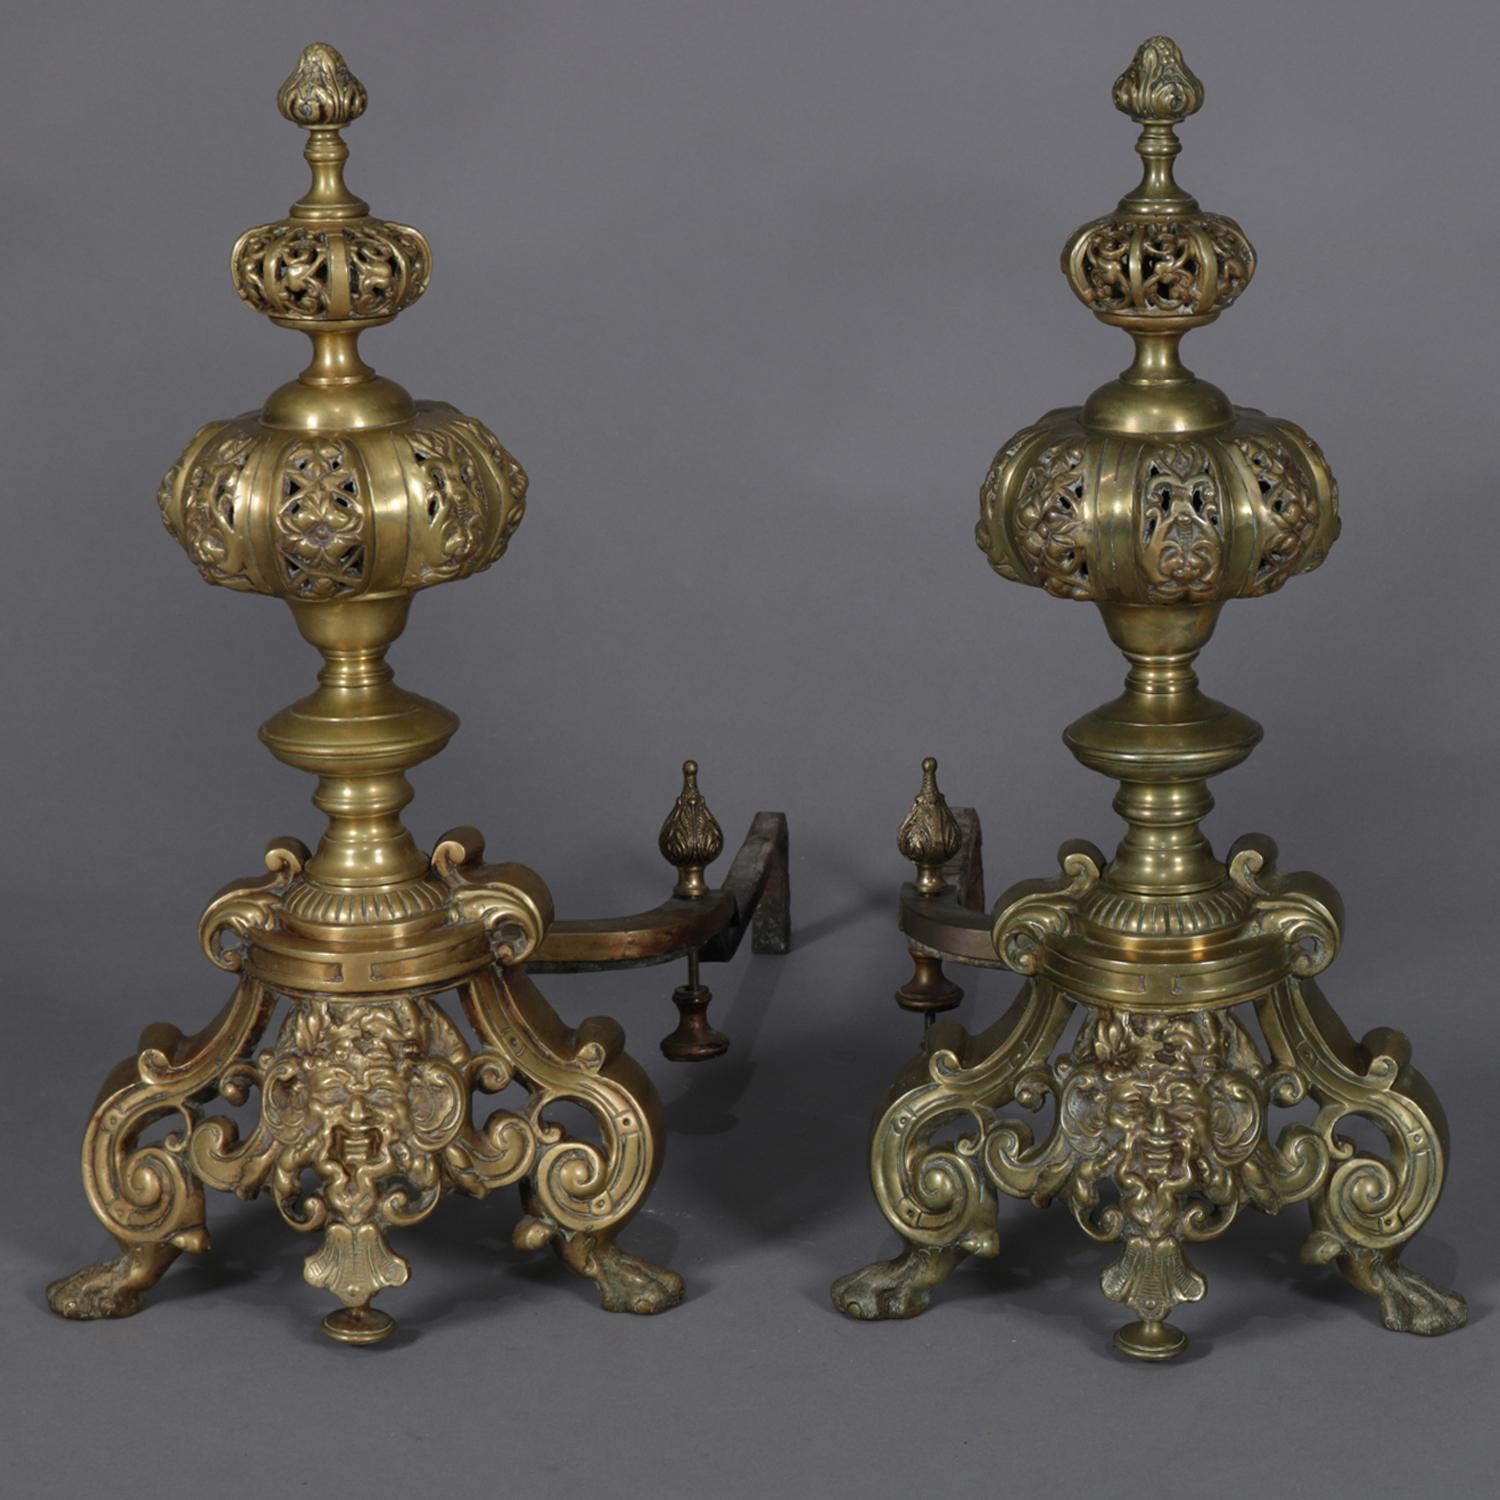 Pair of oversized Baroque style brass chenets feature graduated and pierced graduated bowls and finial over scroll and foliate base having central mask, circa 1890.

***DELIVERY NOTICE – Due to COVID-19 we are employing NO-CONTACT PRACTICES in the